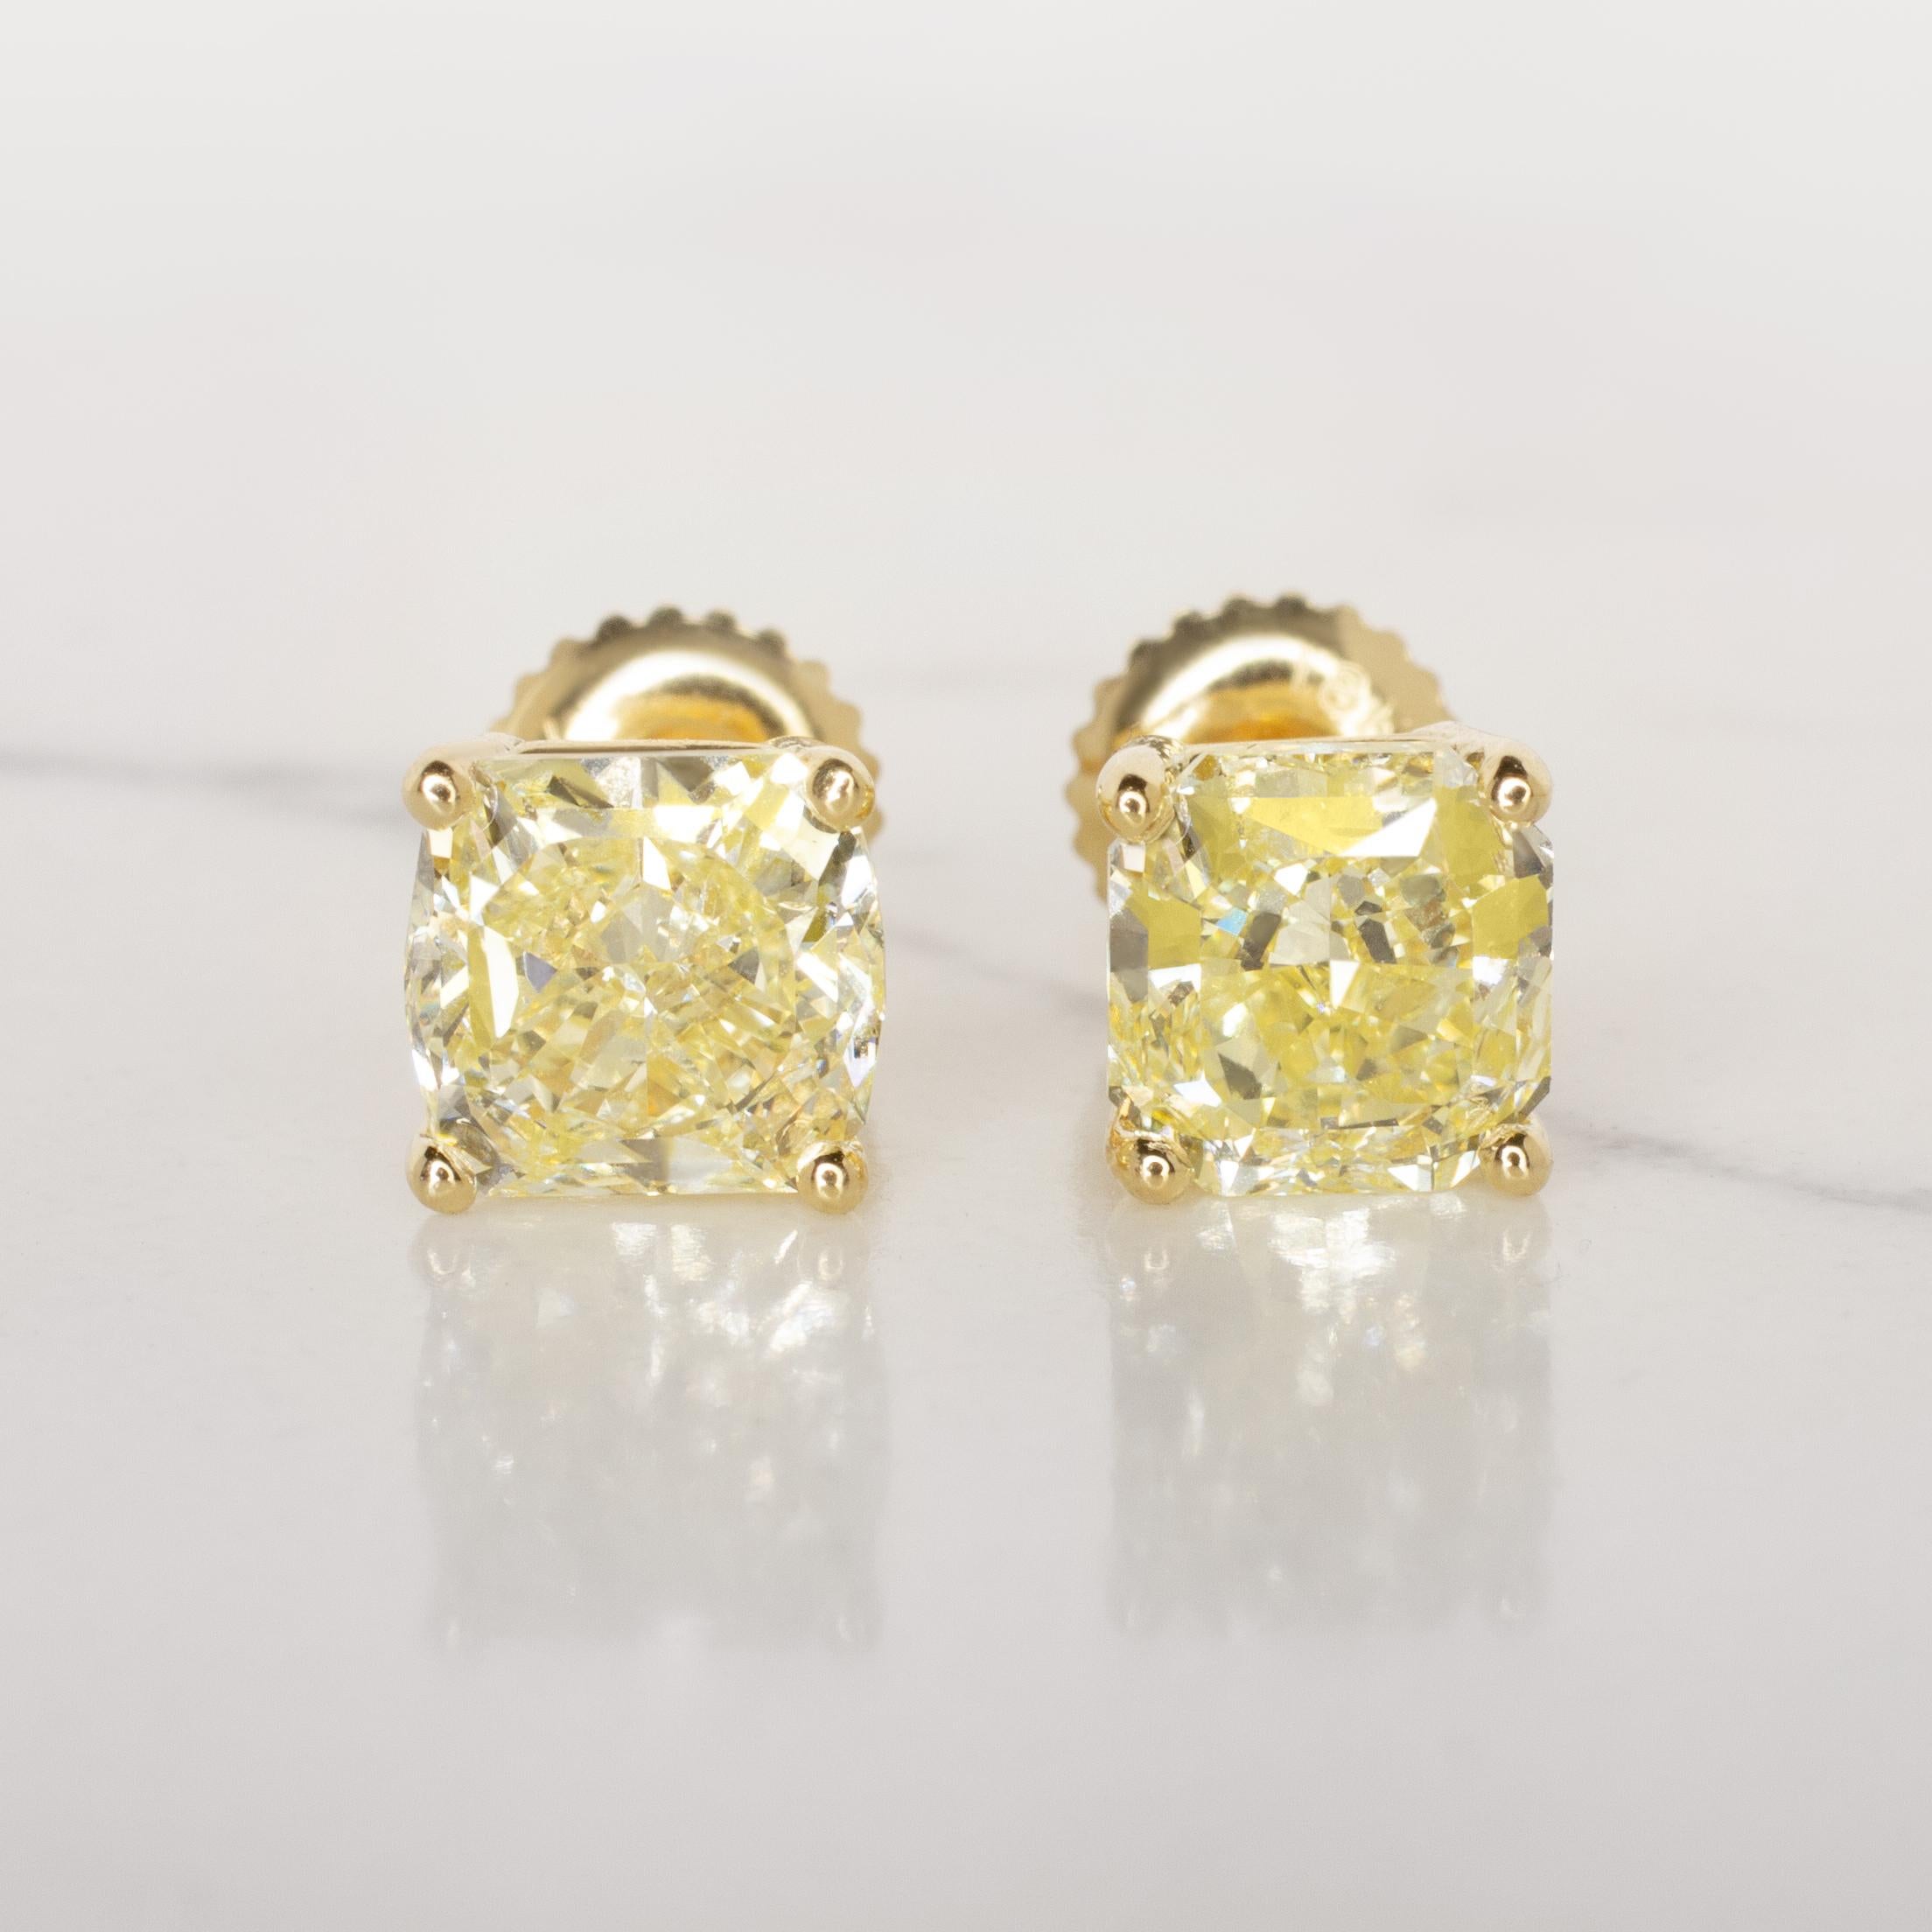 Elevate your elegance with this exceptional pair of GIA Certified Fancy Light Yellow cushion-cut diamond studs, each boasting a dazzling 6 carats. The captivating hue of these diamonds adds a touch of warmth and sophistication to any occasion.

Each